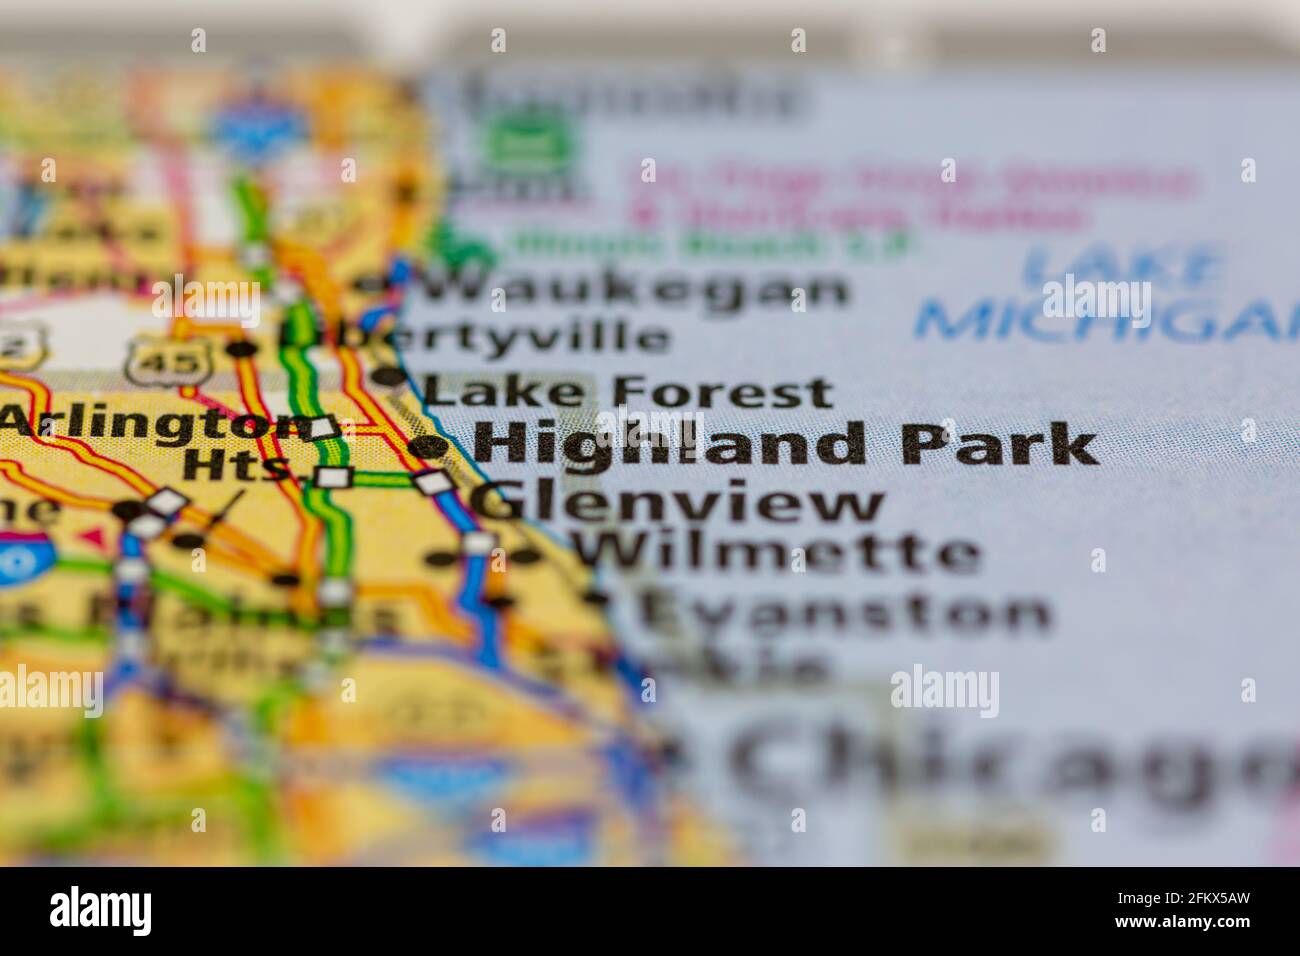 Highland Park Illinois Shown on a Geography map or road map Stock Photo